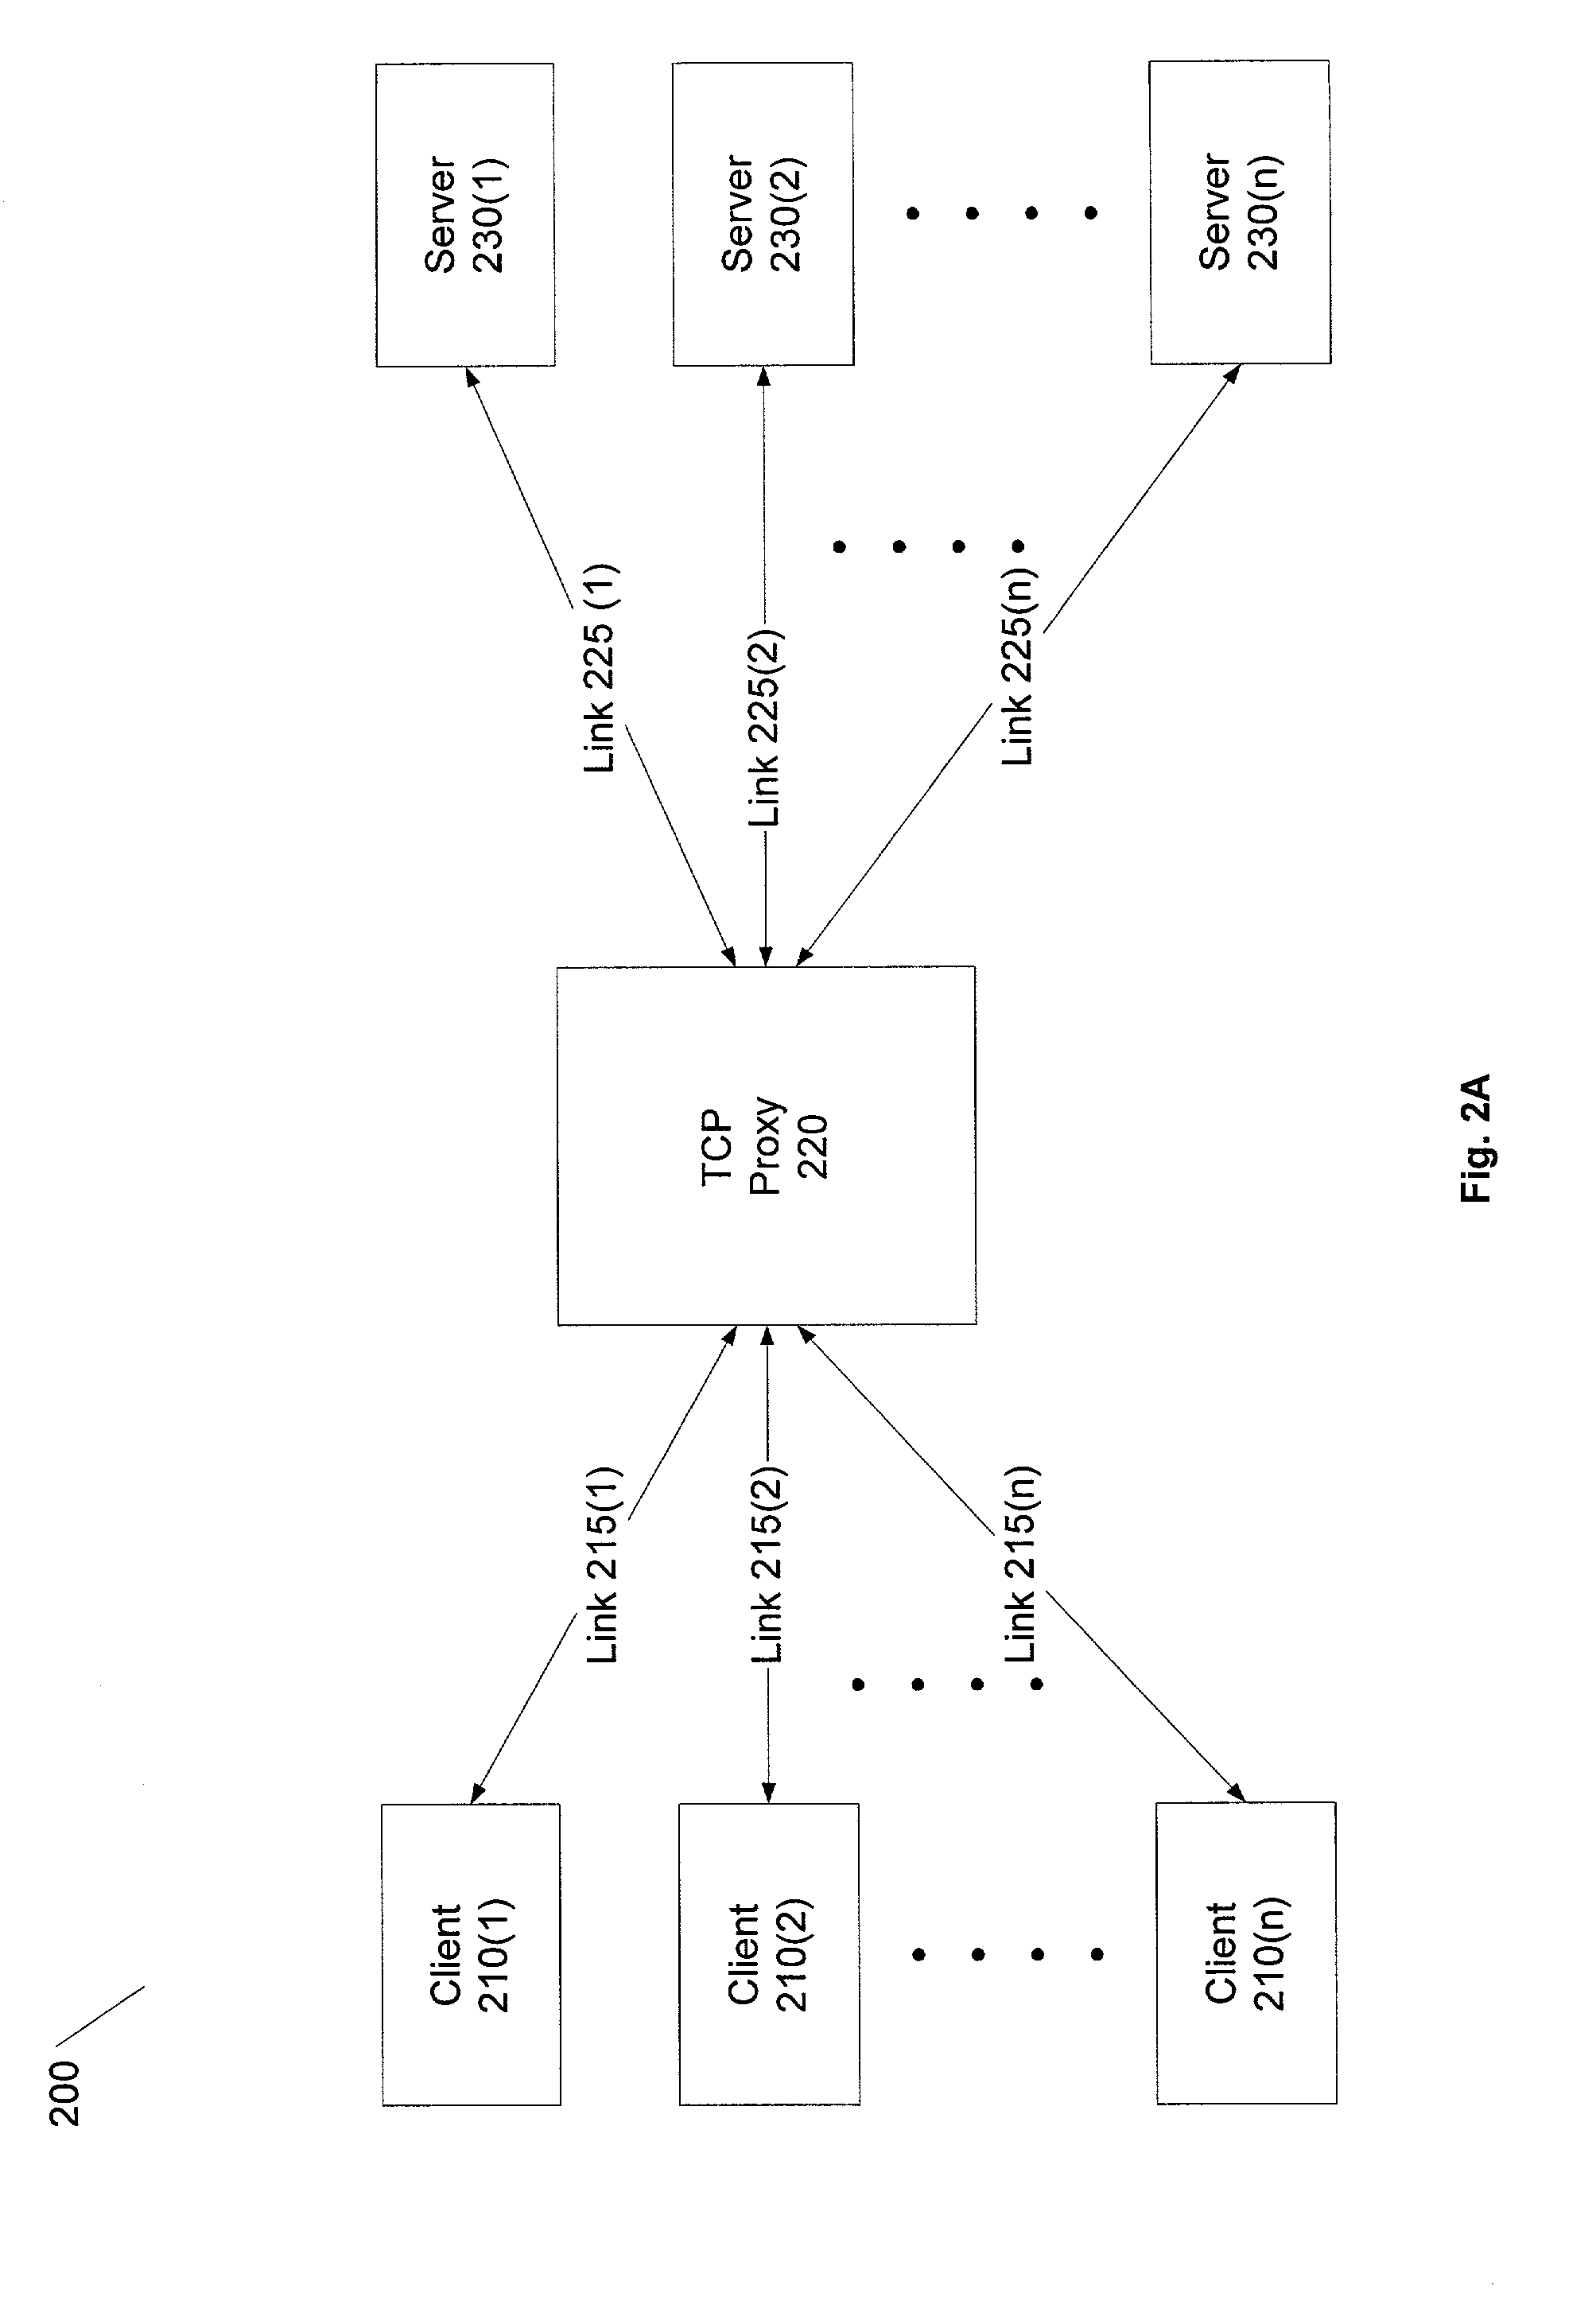 TCP proxy connection management in a gigabit environment